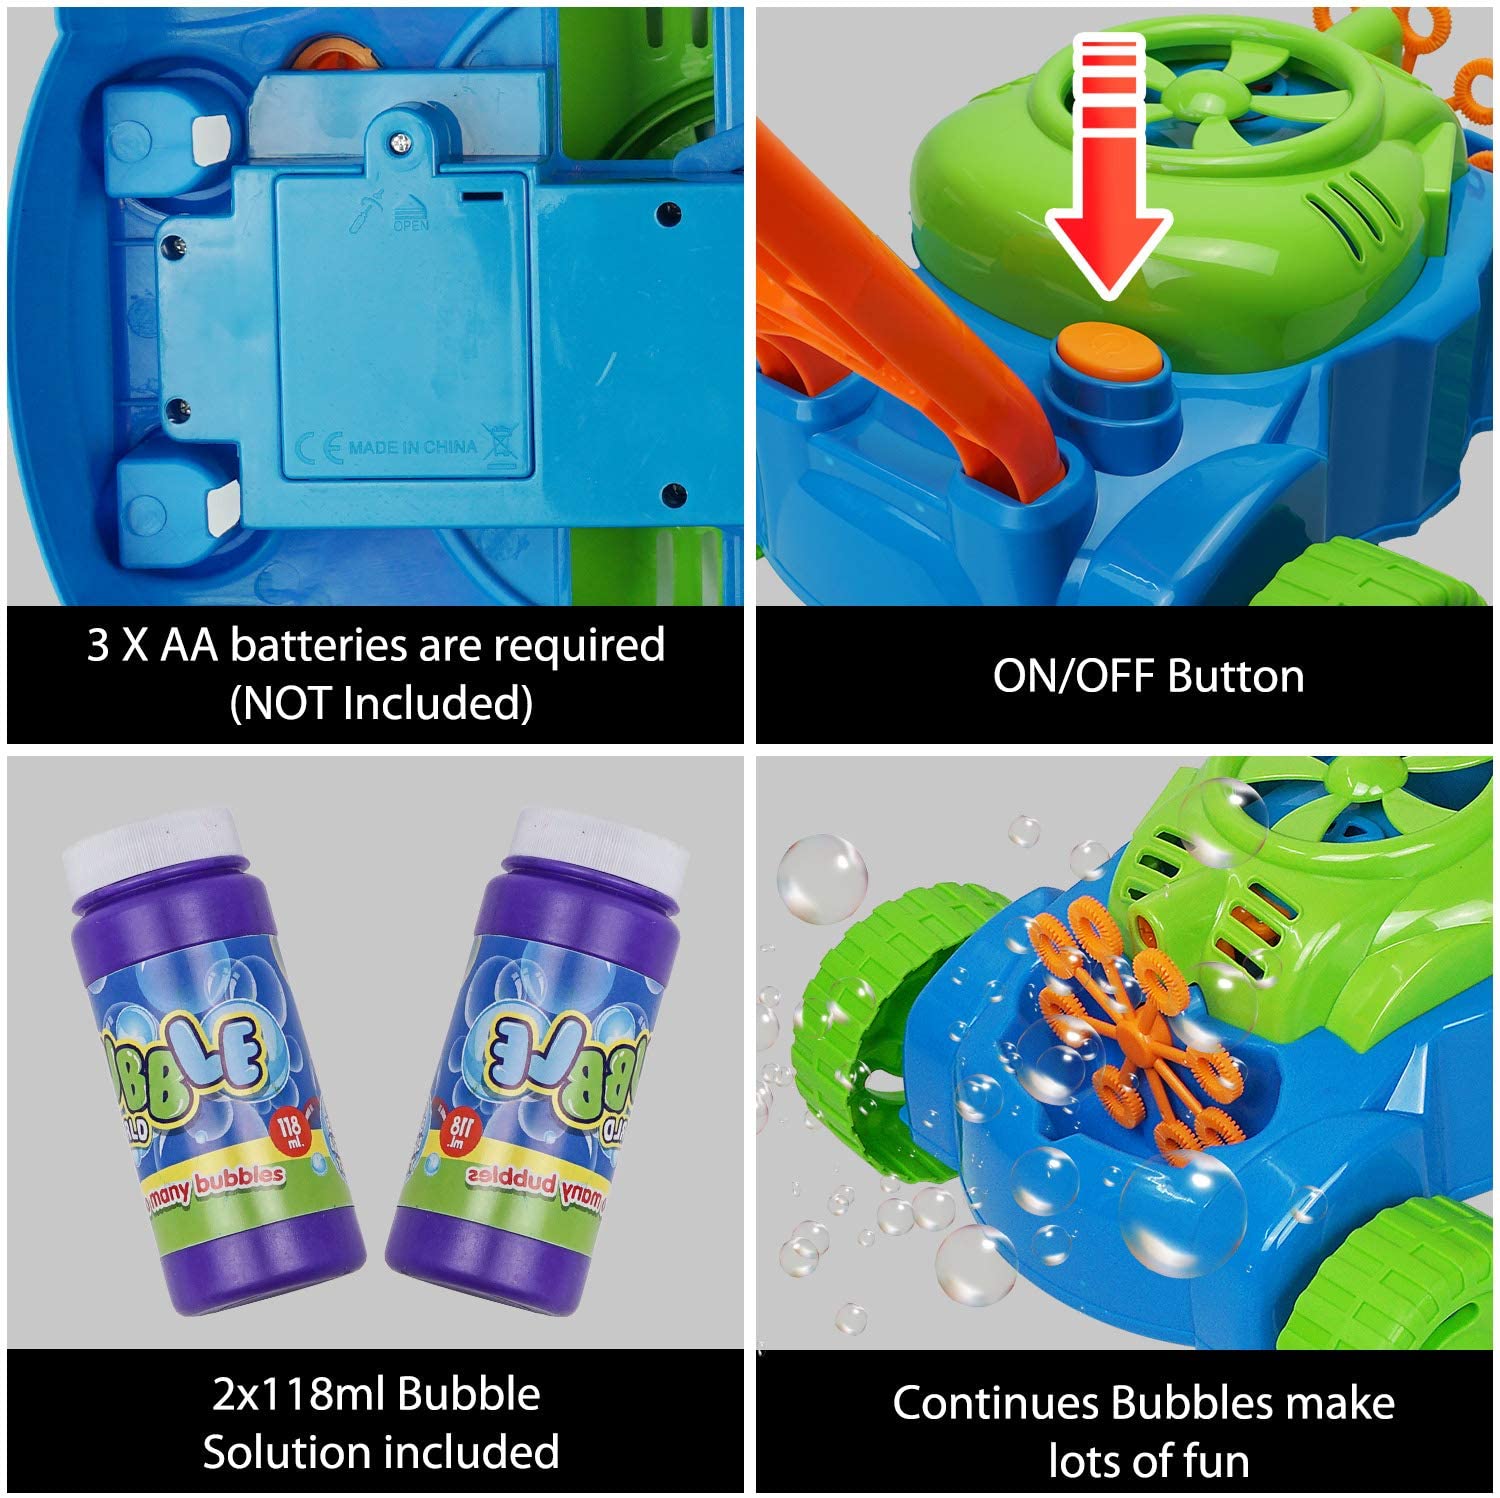 Kids Bubble Lawn Blower Machine with 2x118ml Bubble Solutions Bubble Machine Bubble Mower for Toddlers Outdoor Toys Gifts for 2 3 4 5 6 7 8 Kids Girls Boys MOZOOSON Gifts for 2-10 Years Old Kids 